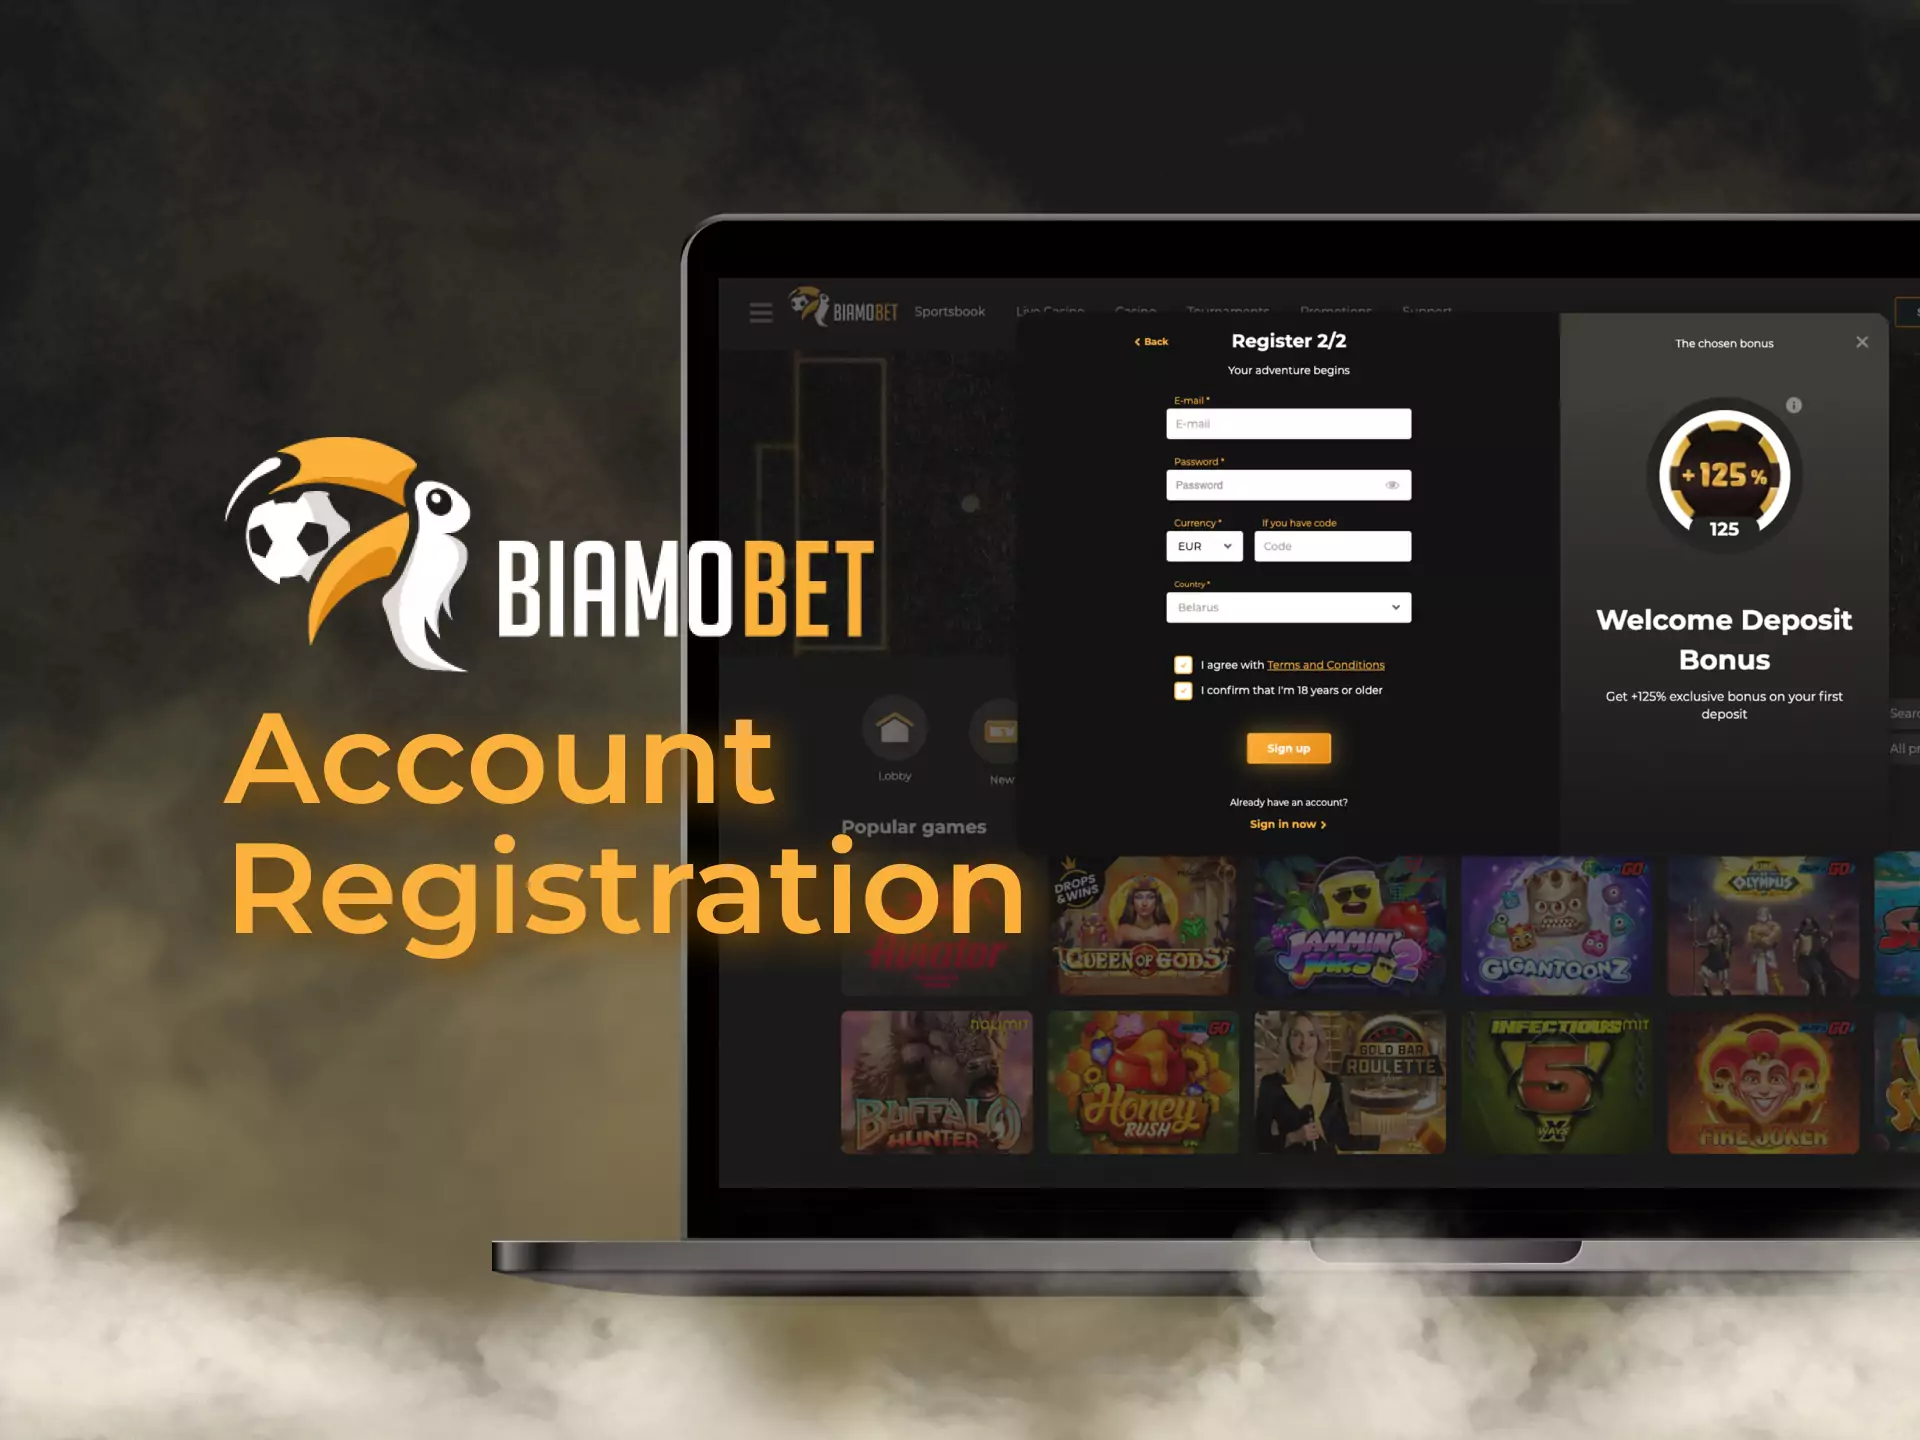 Go to the official website on Biamobet and create a new account.